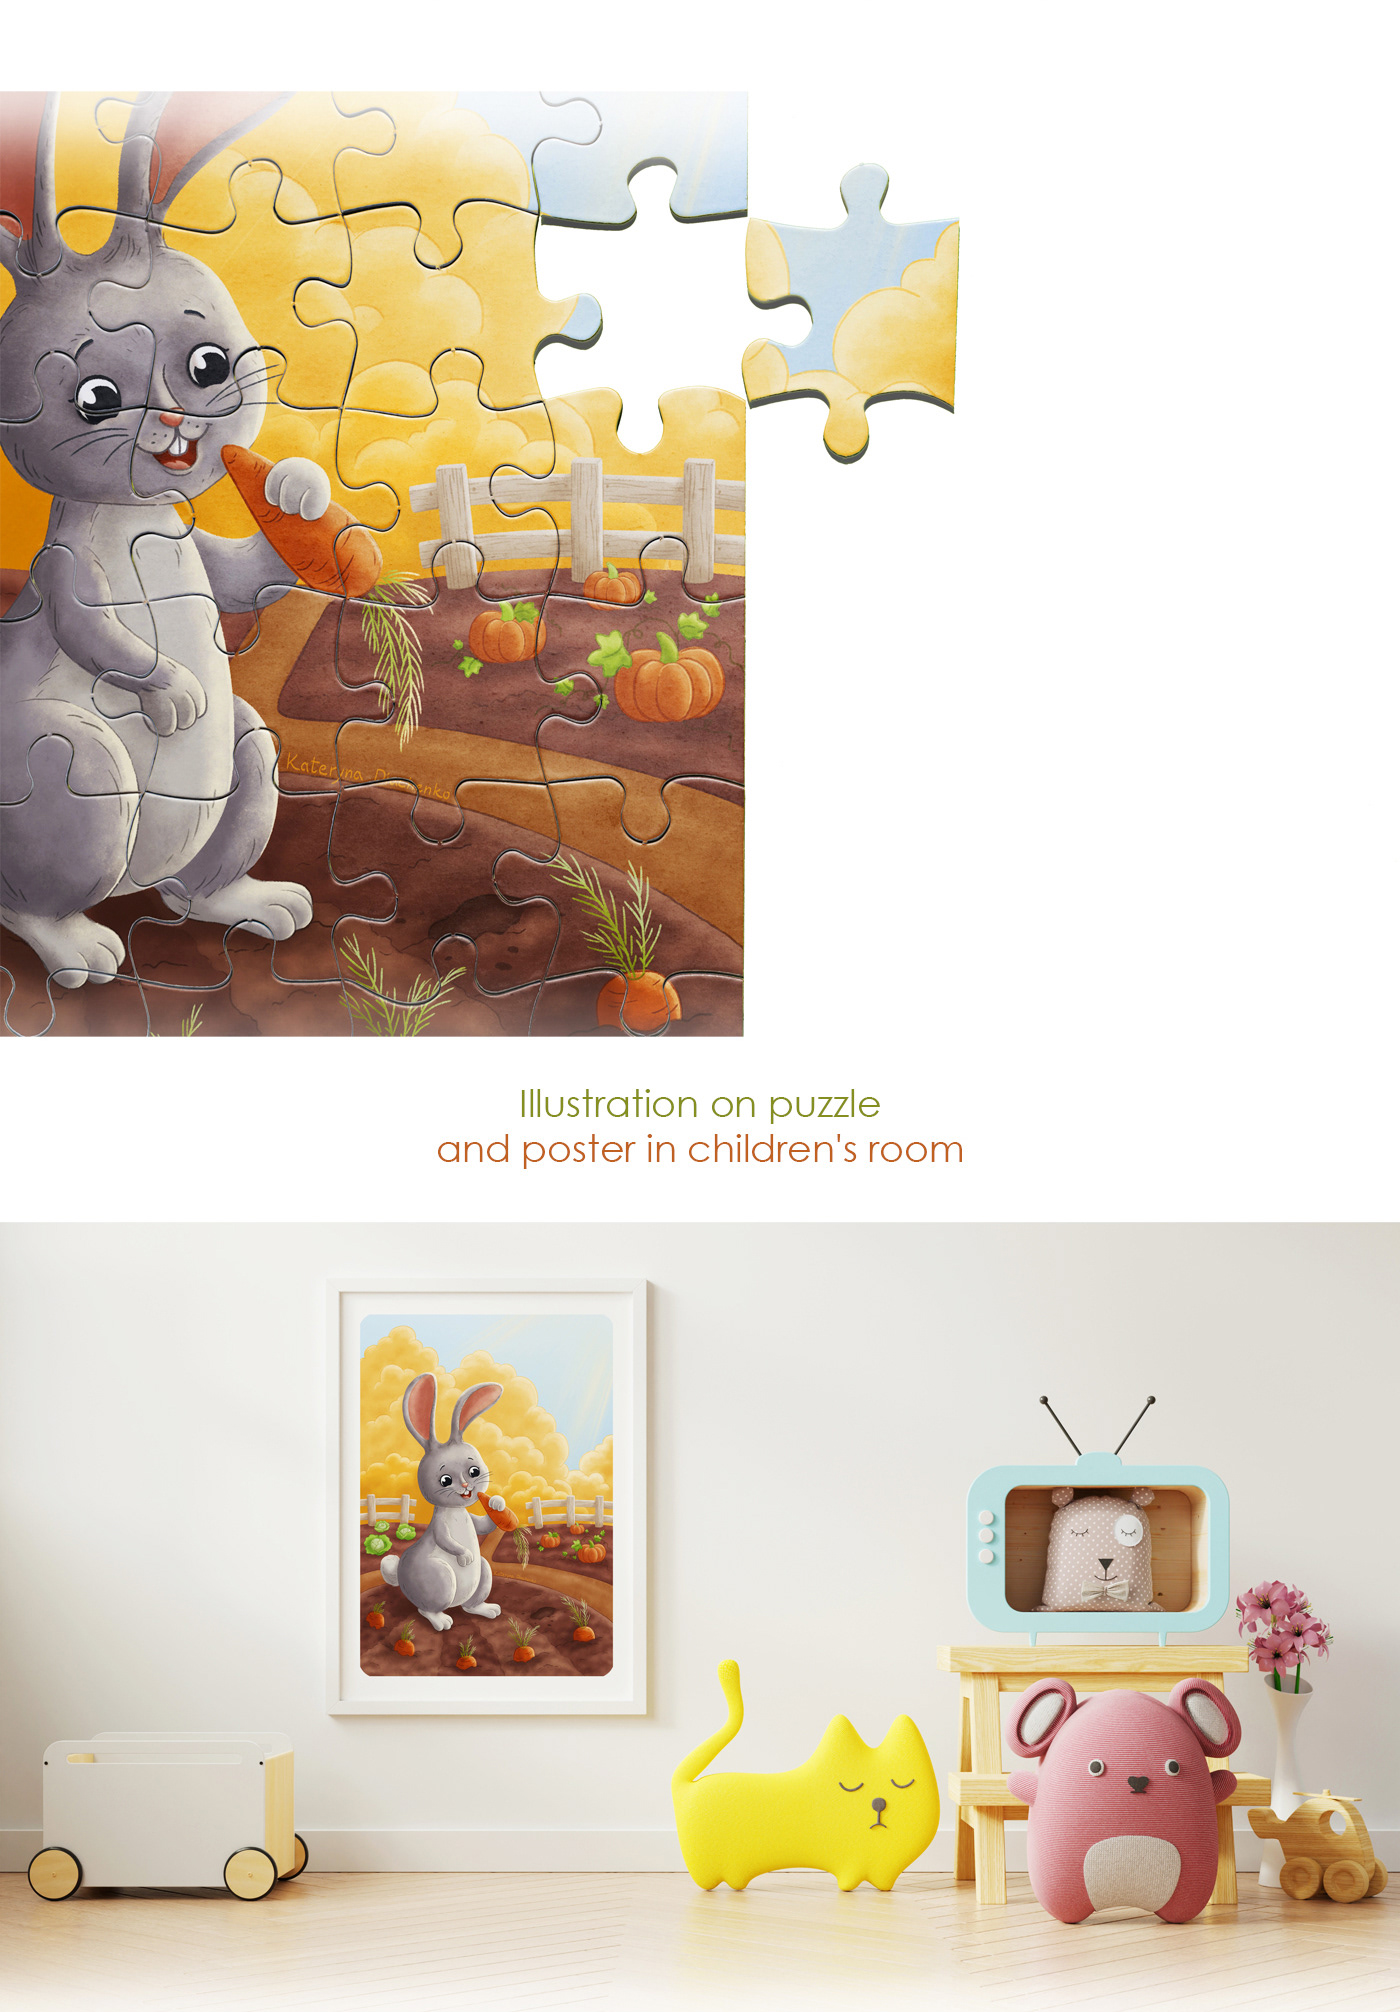 Children's illustration with Bunny on a poster in children's room and puzzle for kids